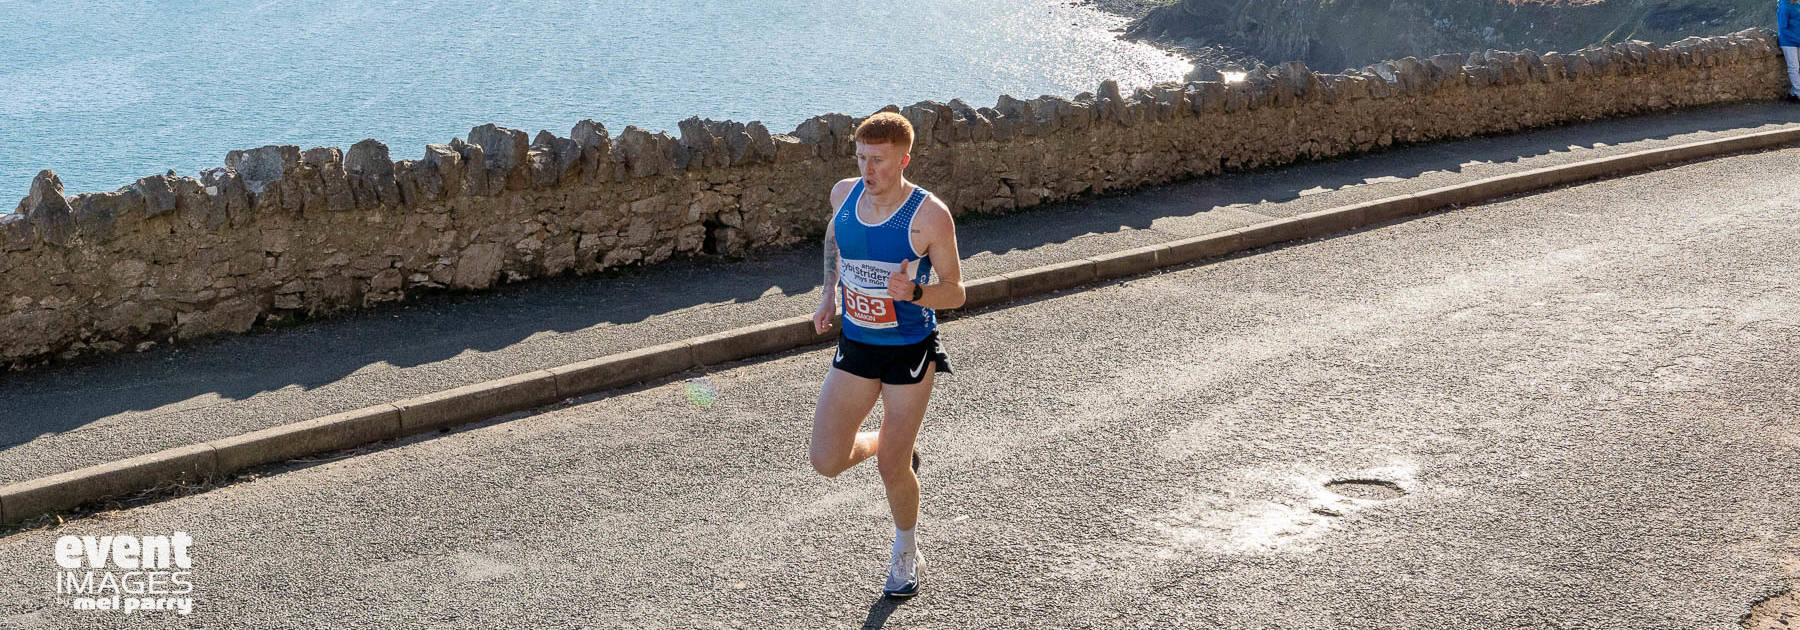 Runner in the Llandudno Nick Beer 10k with view of the pier